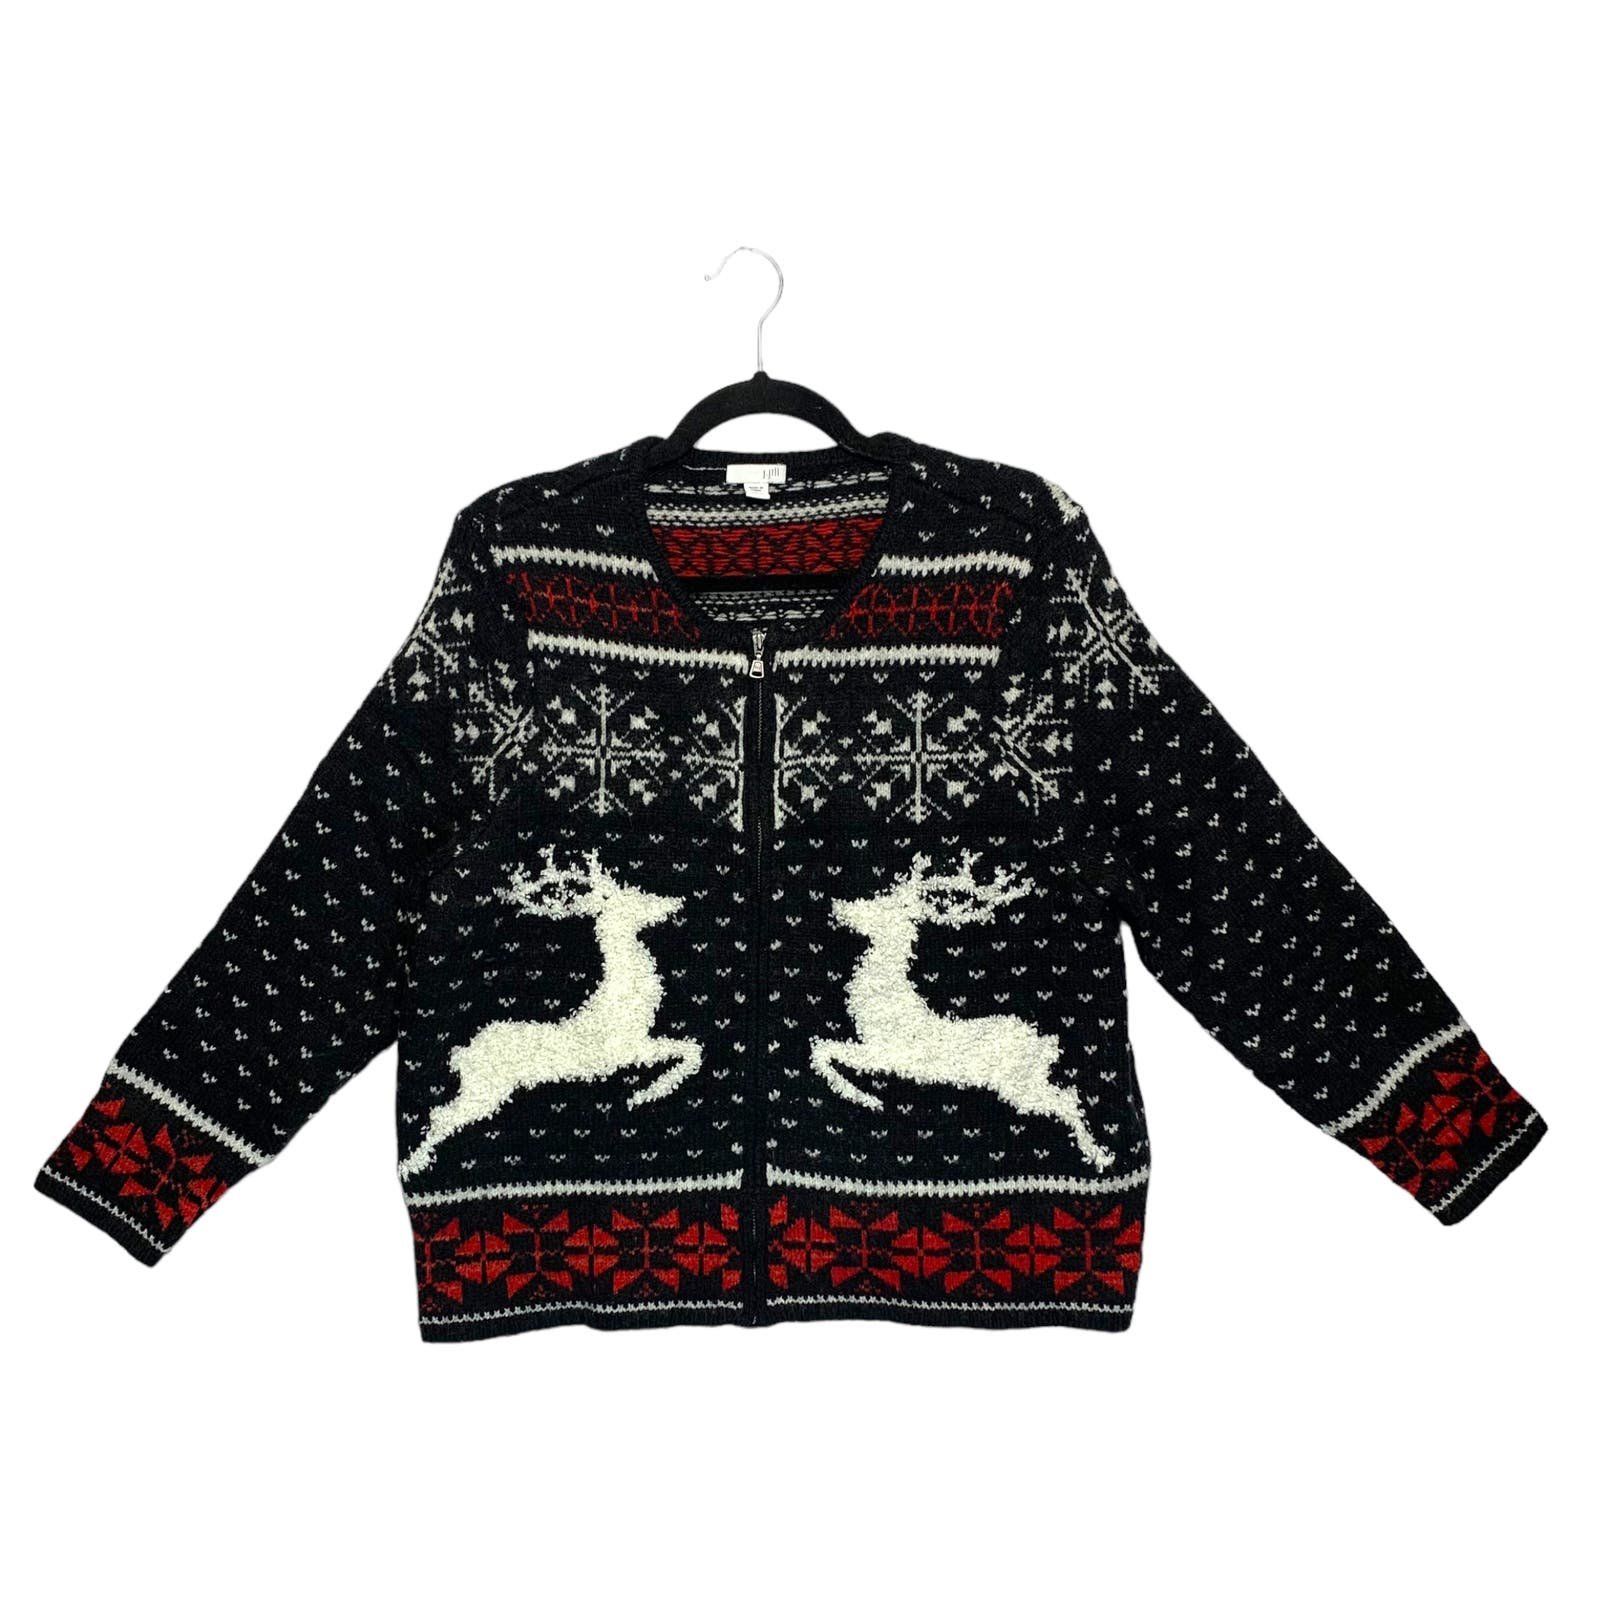 cheapest place to buy  J. Jill Deer Valley Holiday Reindeer Wool Full Zip Sweater Women´s Sz LP Black OLiucXuTh just for you